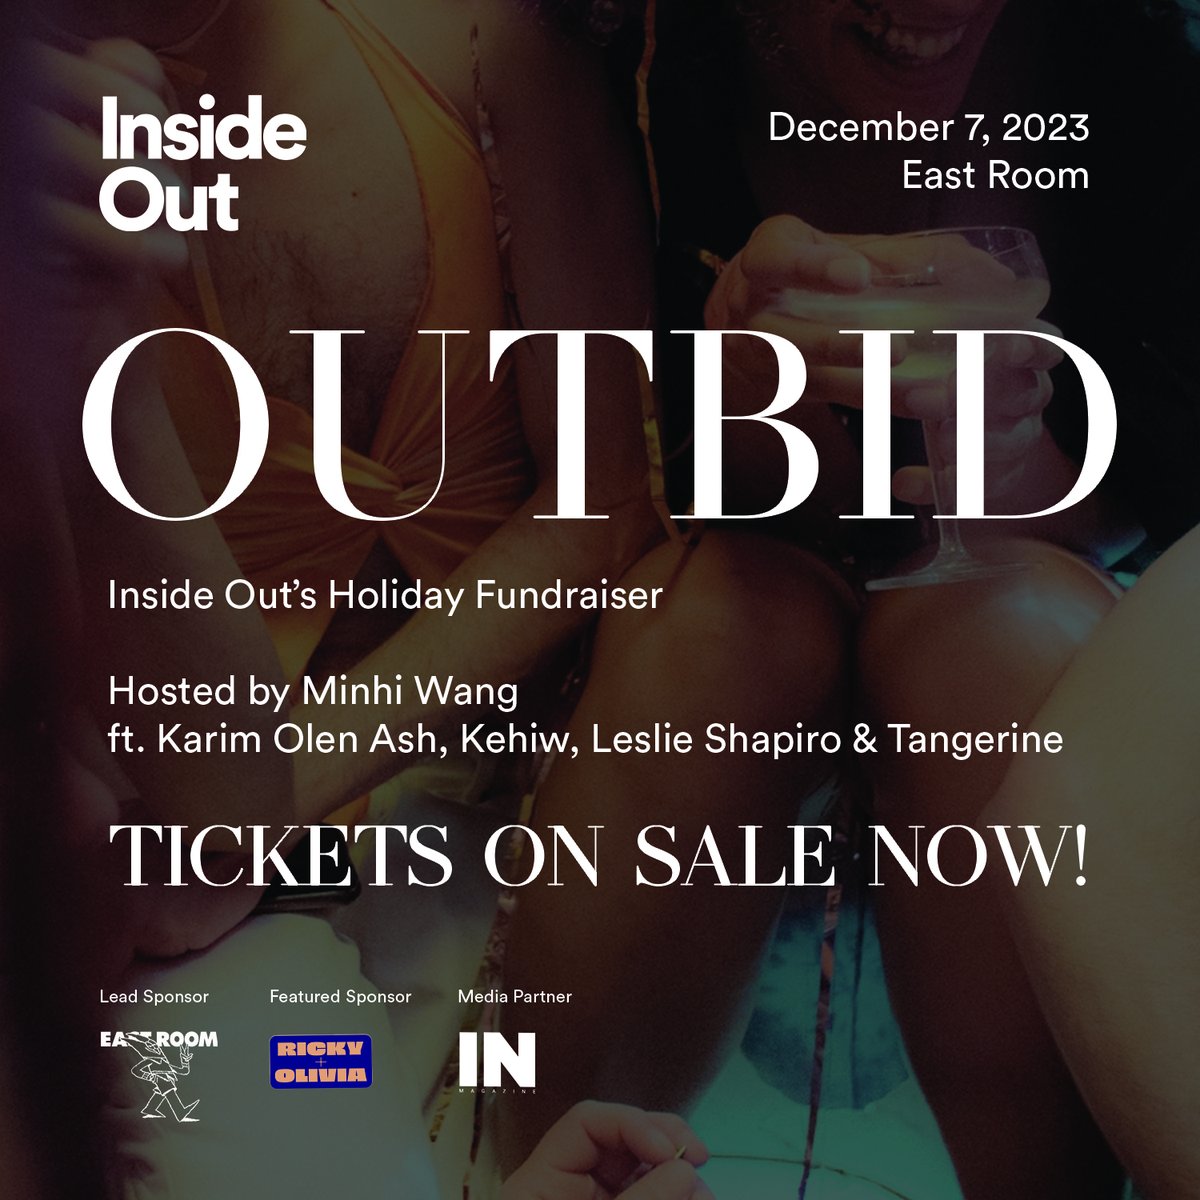 Tickets are now on sale for @insideoutto annual Holiday Fundraiser; OUTBID! Coming up on December 7, this party comes with the opportunity to outbid and donate for a cause. OUTBID is an event you don’t want to miss, an essential fundraiser for Inside Out. outbid-insideout.ca